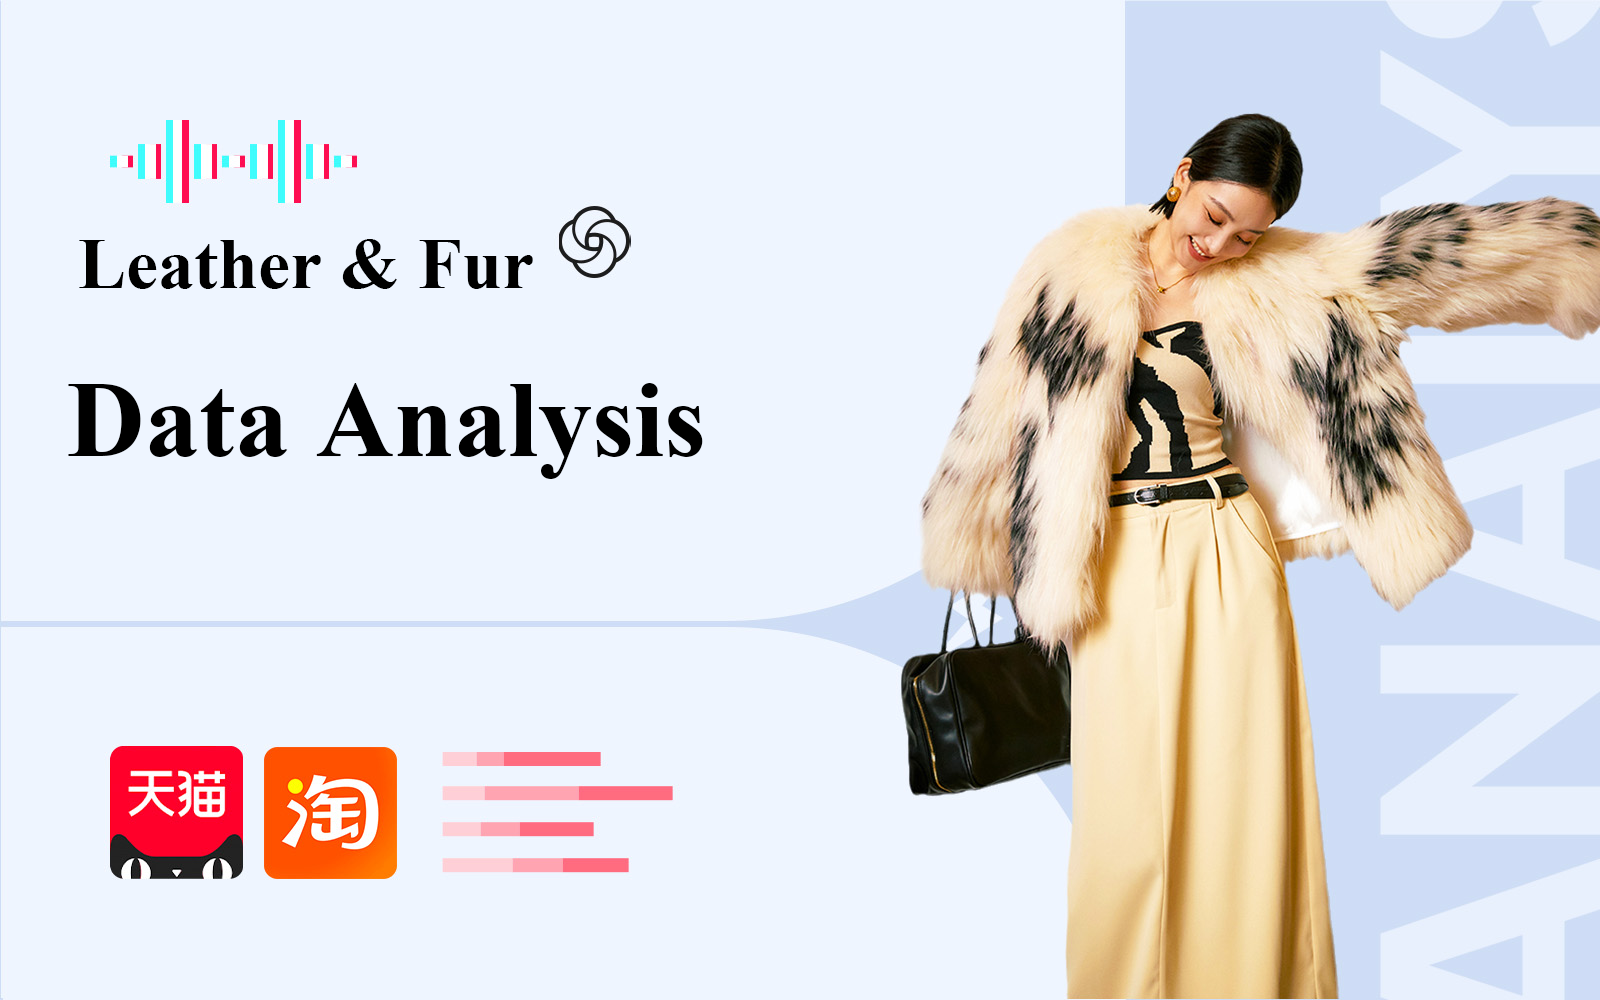 Leather & Fur -- The Data Analysis of Womenswear E-Commerce